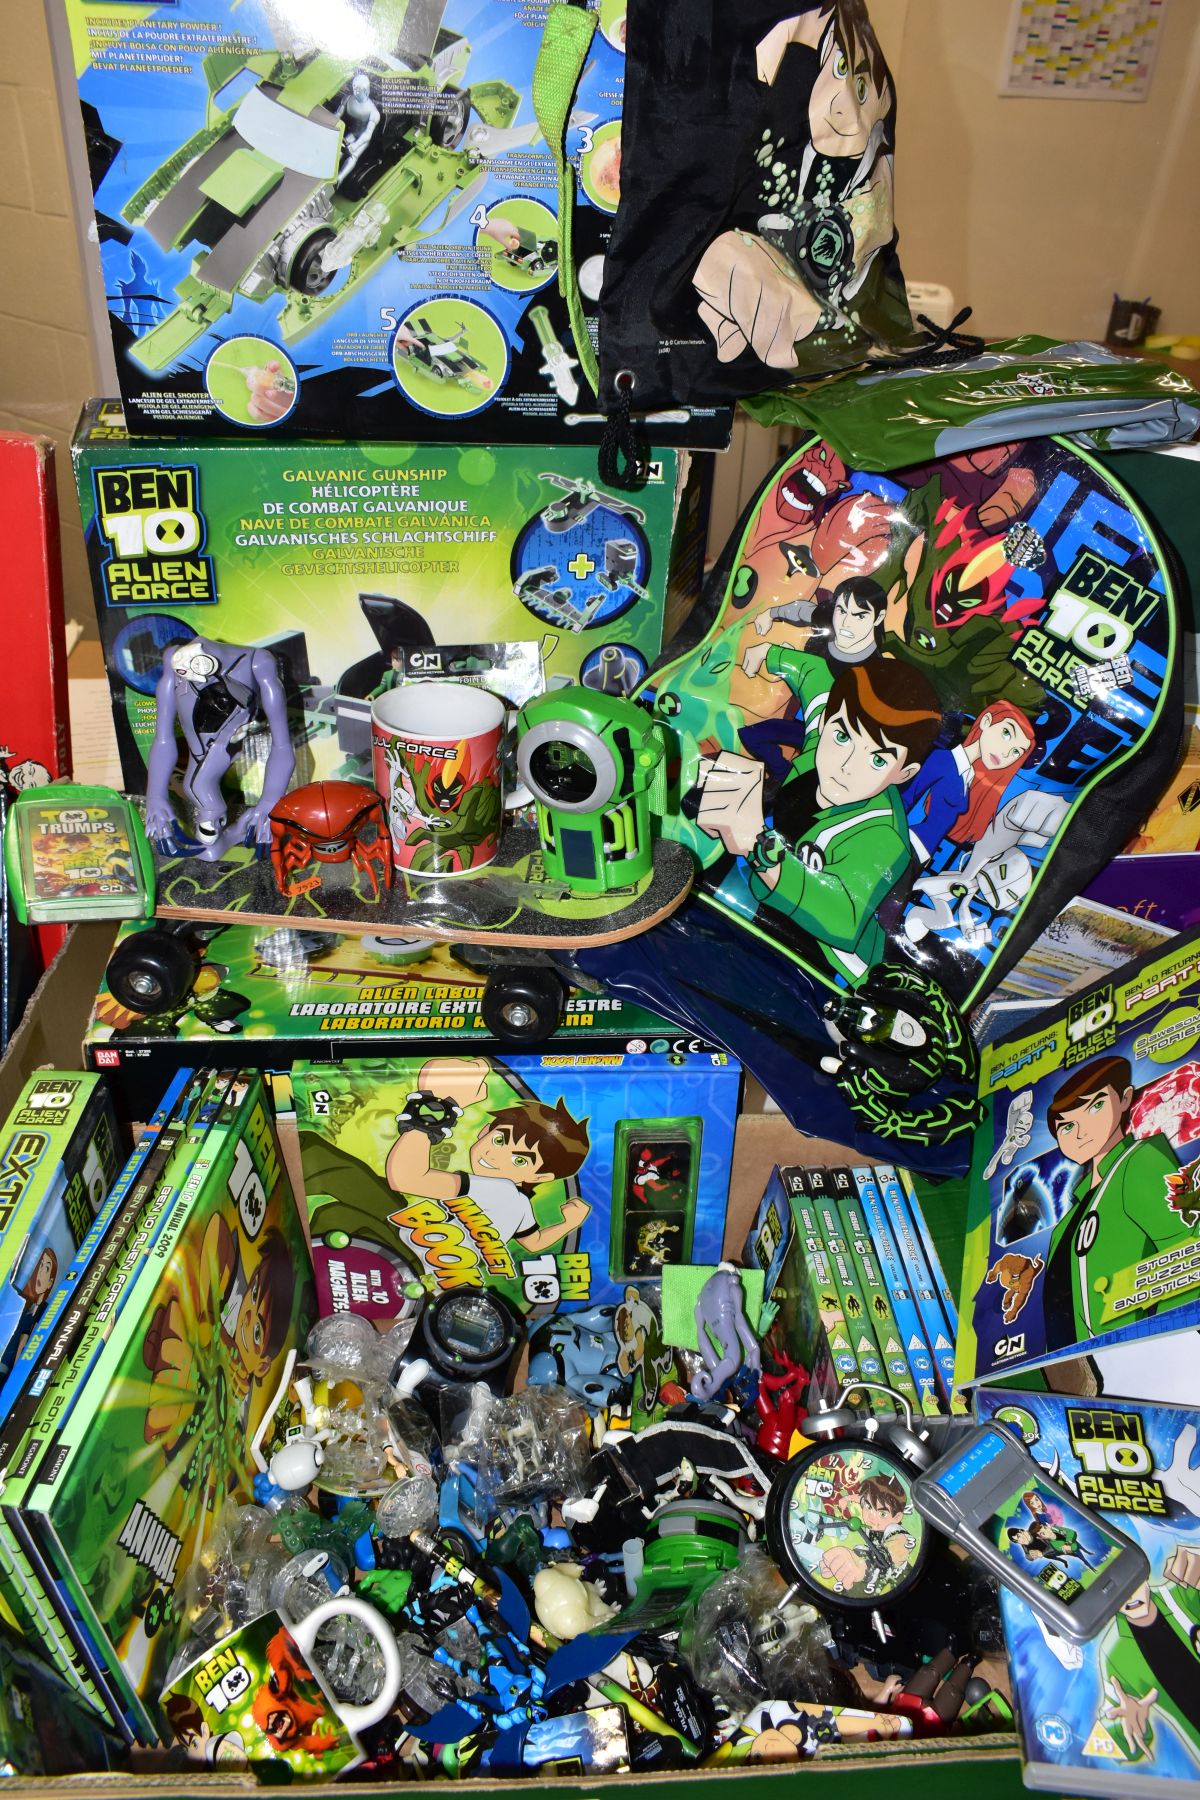 A COLLECTION OF BEN 10 ALIEN FORCE TOYS AND COLLECTABLES, to include boxed Bandai Kevin Levin's